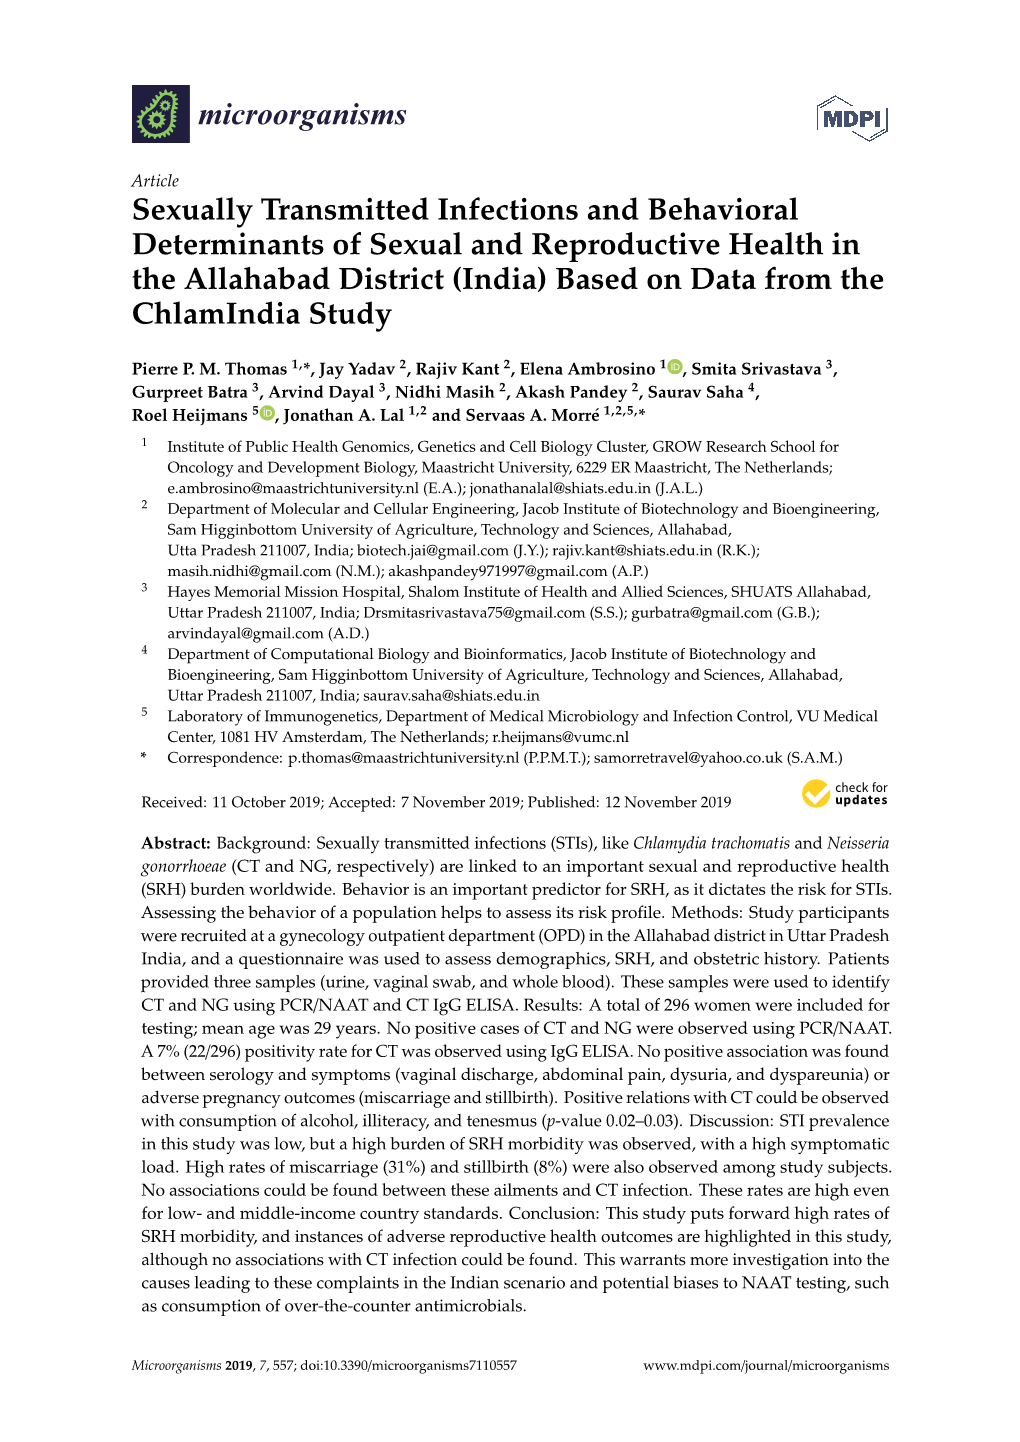 Sexually Transmitted Infections and Behavioral Determinants Of